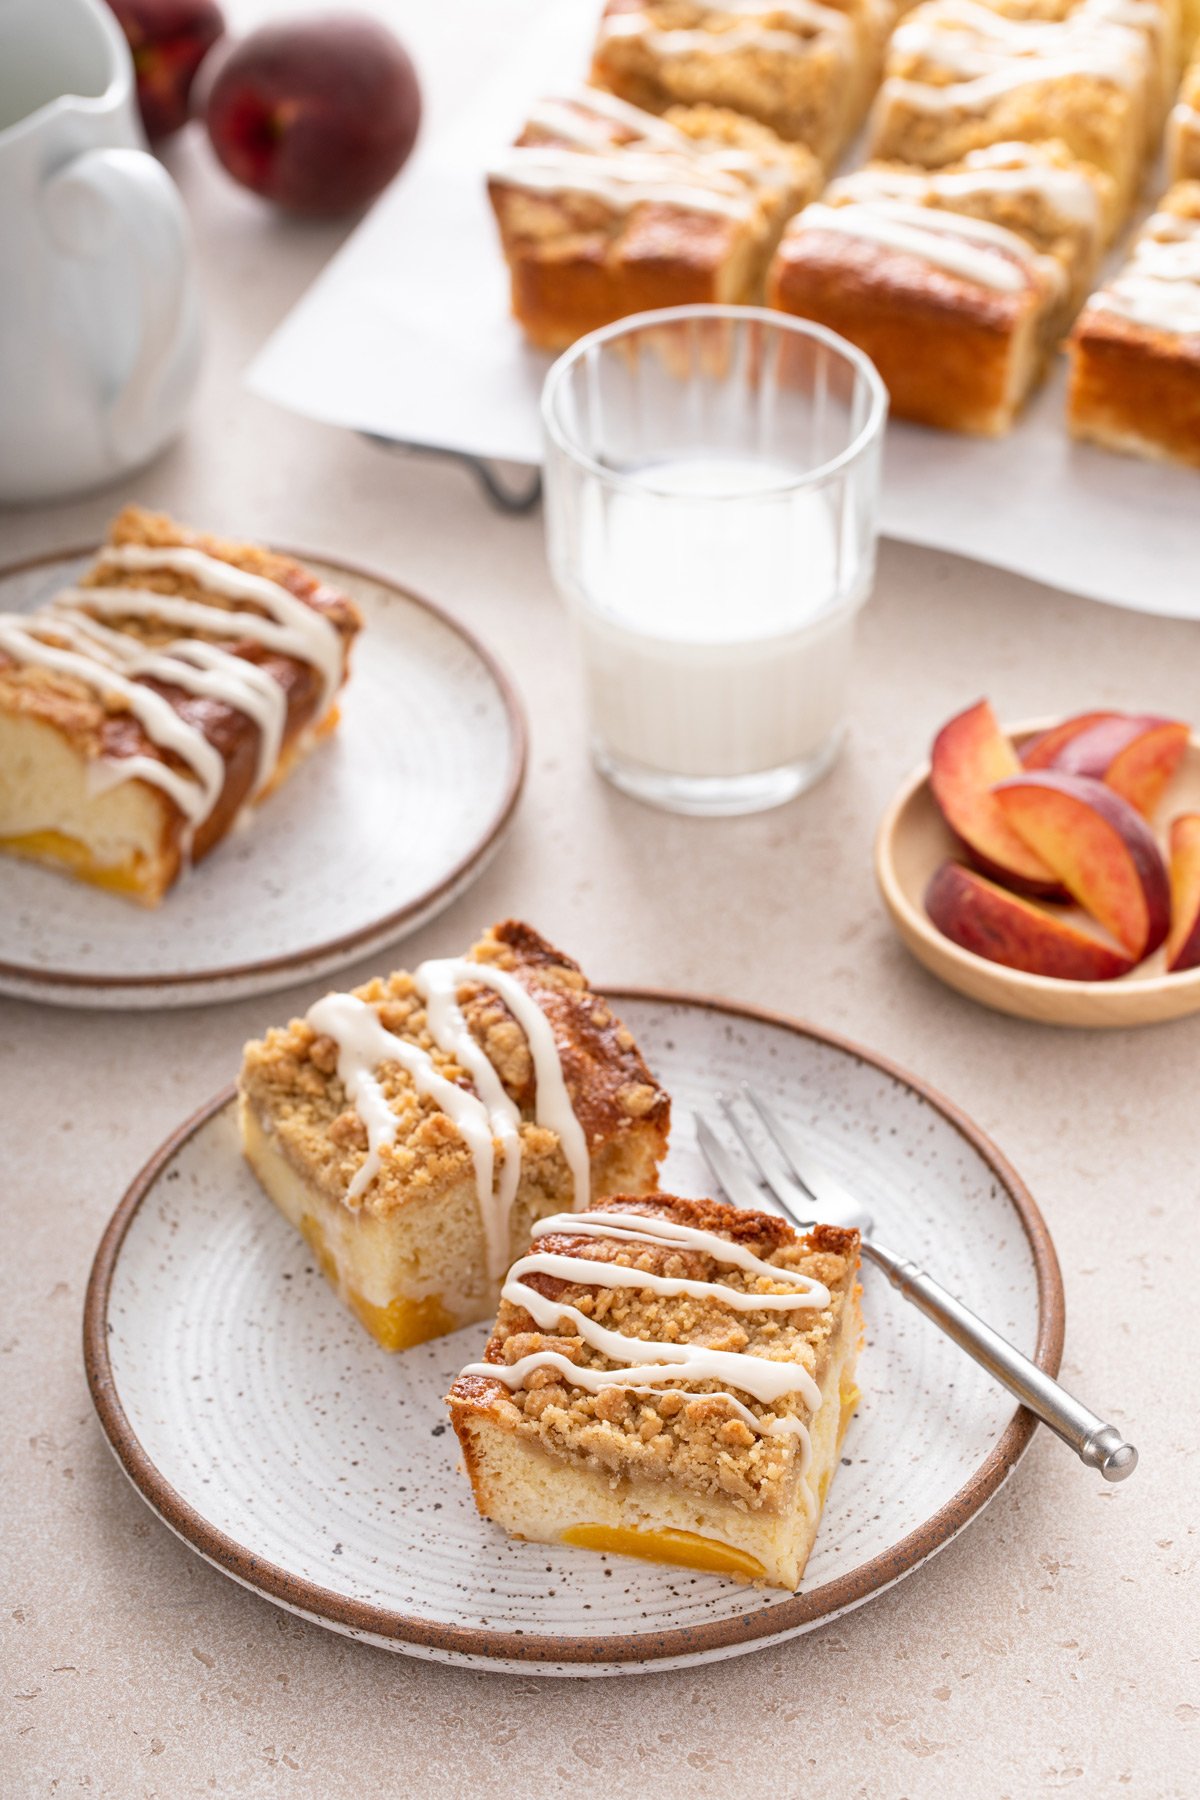 Two plates, each holding slices of peach coffee cake, set on a countertop with a glass of milk and more cake in the background.